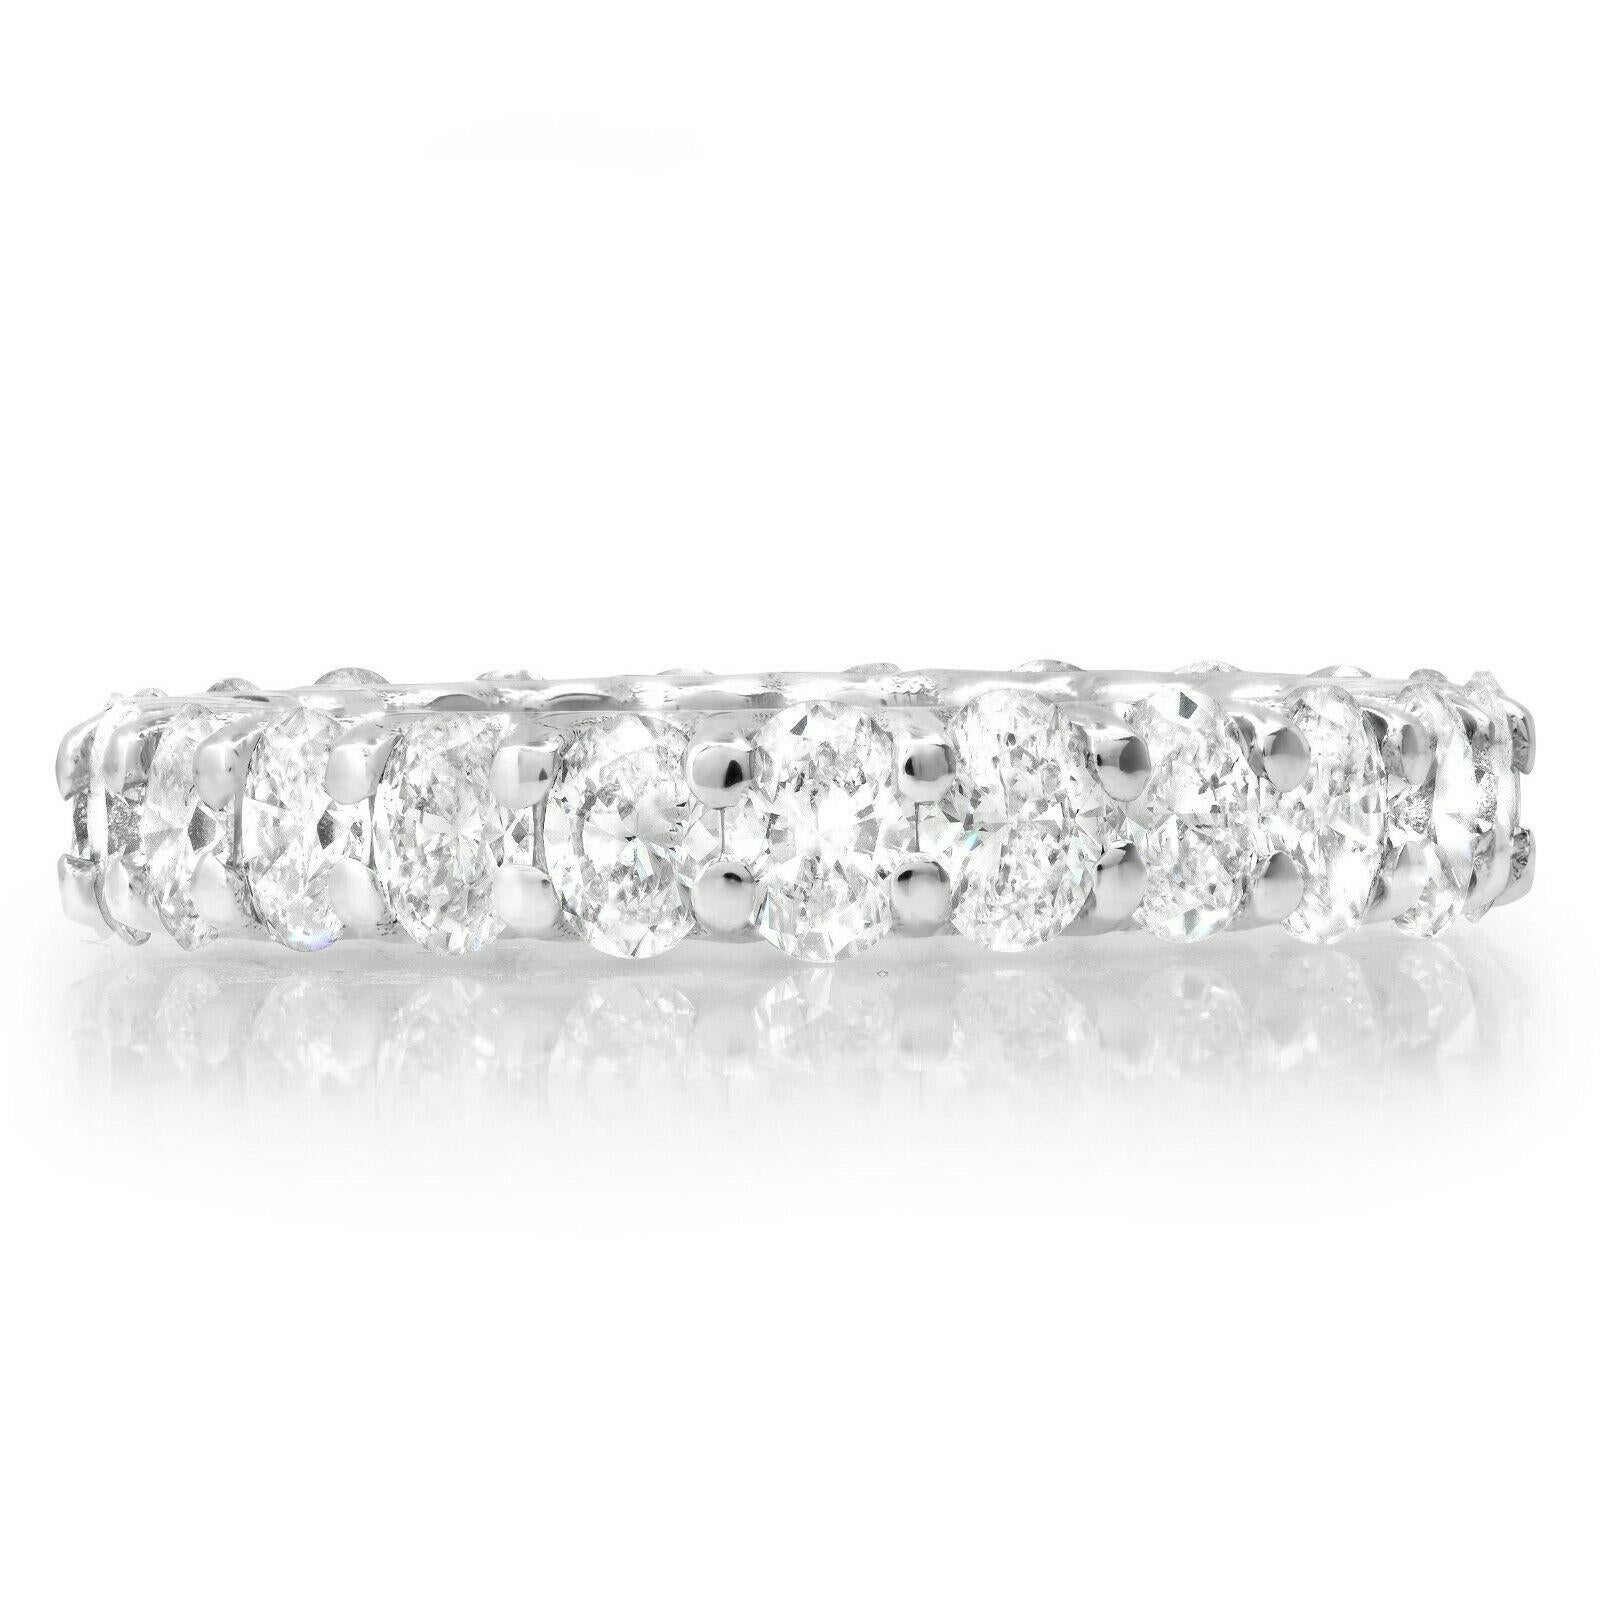 23 oval cut diamonds (3.24 total carat weight) eternity engagement ring in 18k white gold. The ring is designed and handmade locally in Los Angeles by Sage Designs L.A. using earth-mined and conflict free diamonds. The ring is 4mm wide and weighs